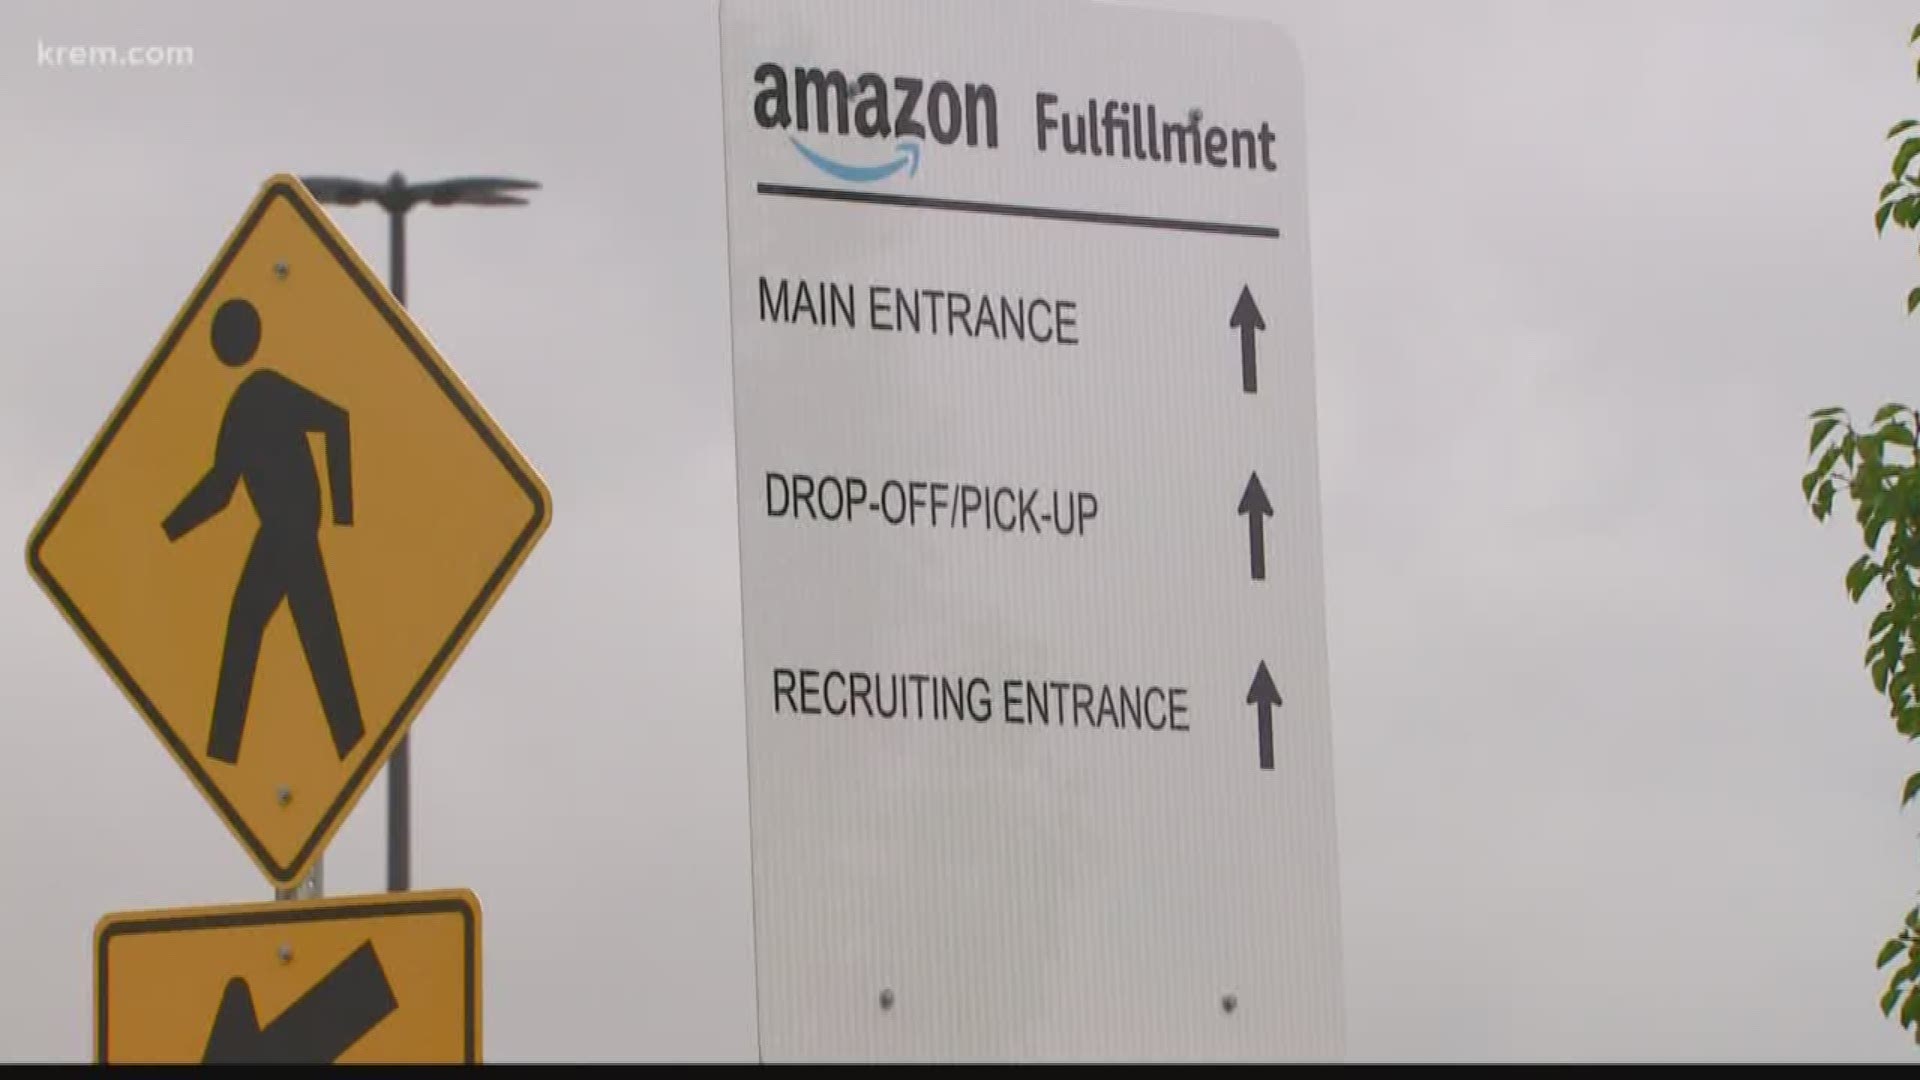 KREM's Amanda Roley spoke with Amazon officials about the opening date of their Spokane fulfillment center.